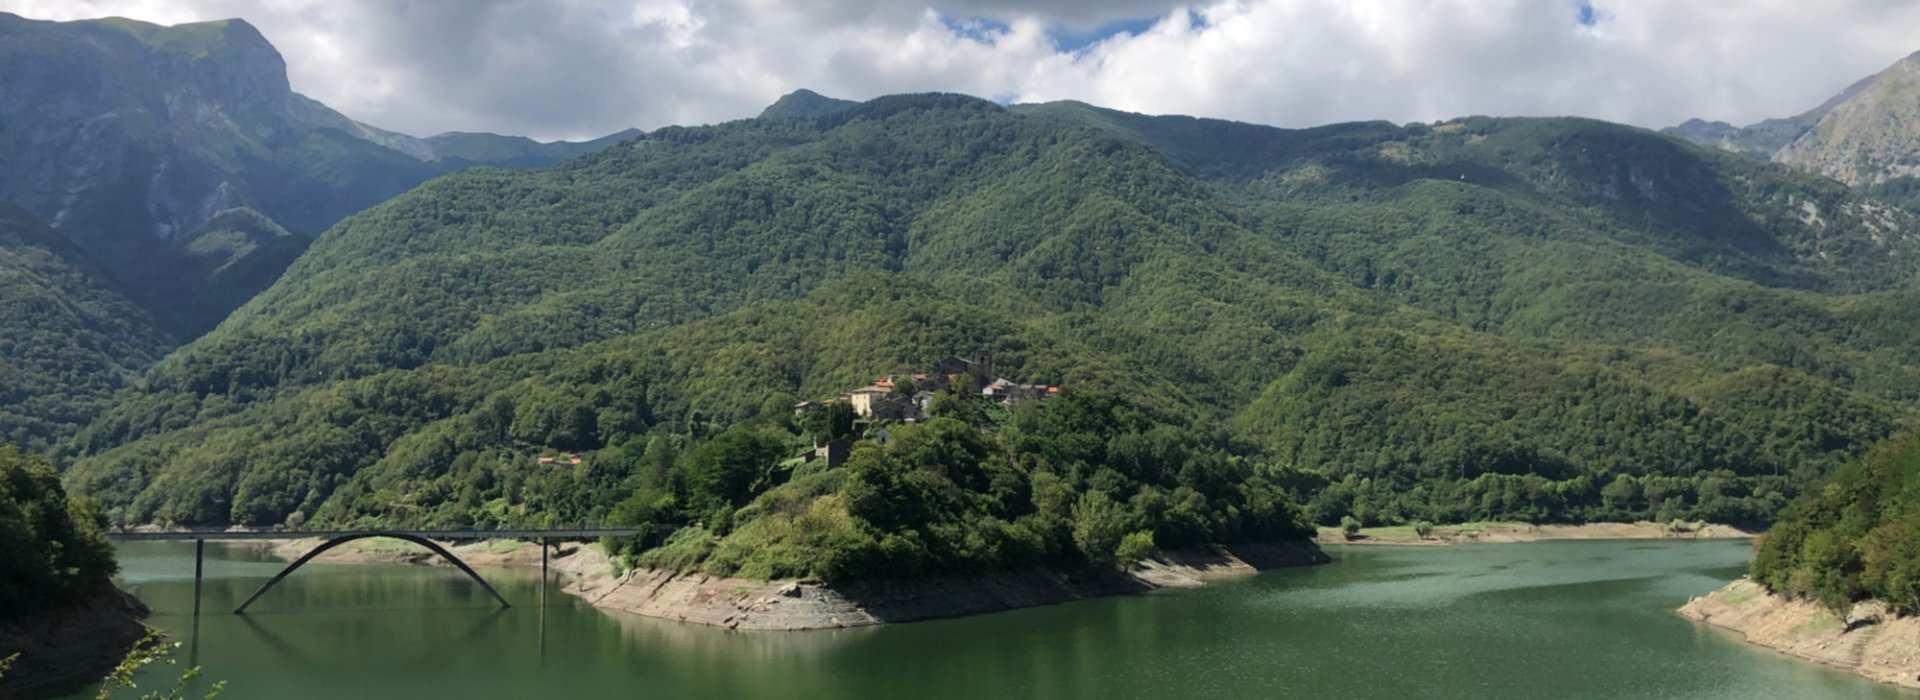 The lake of Vagli, one of the most important in the Garfagnana area Tuscany